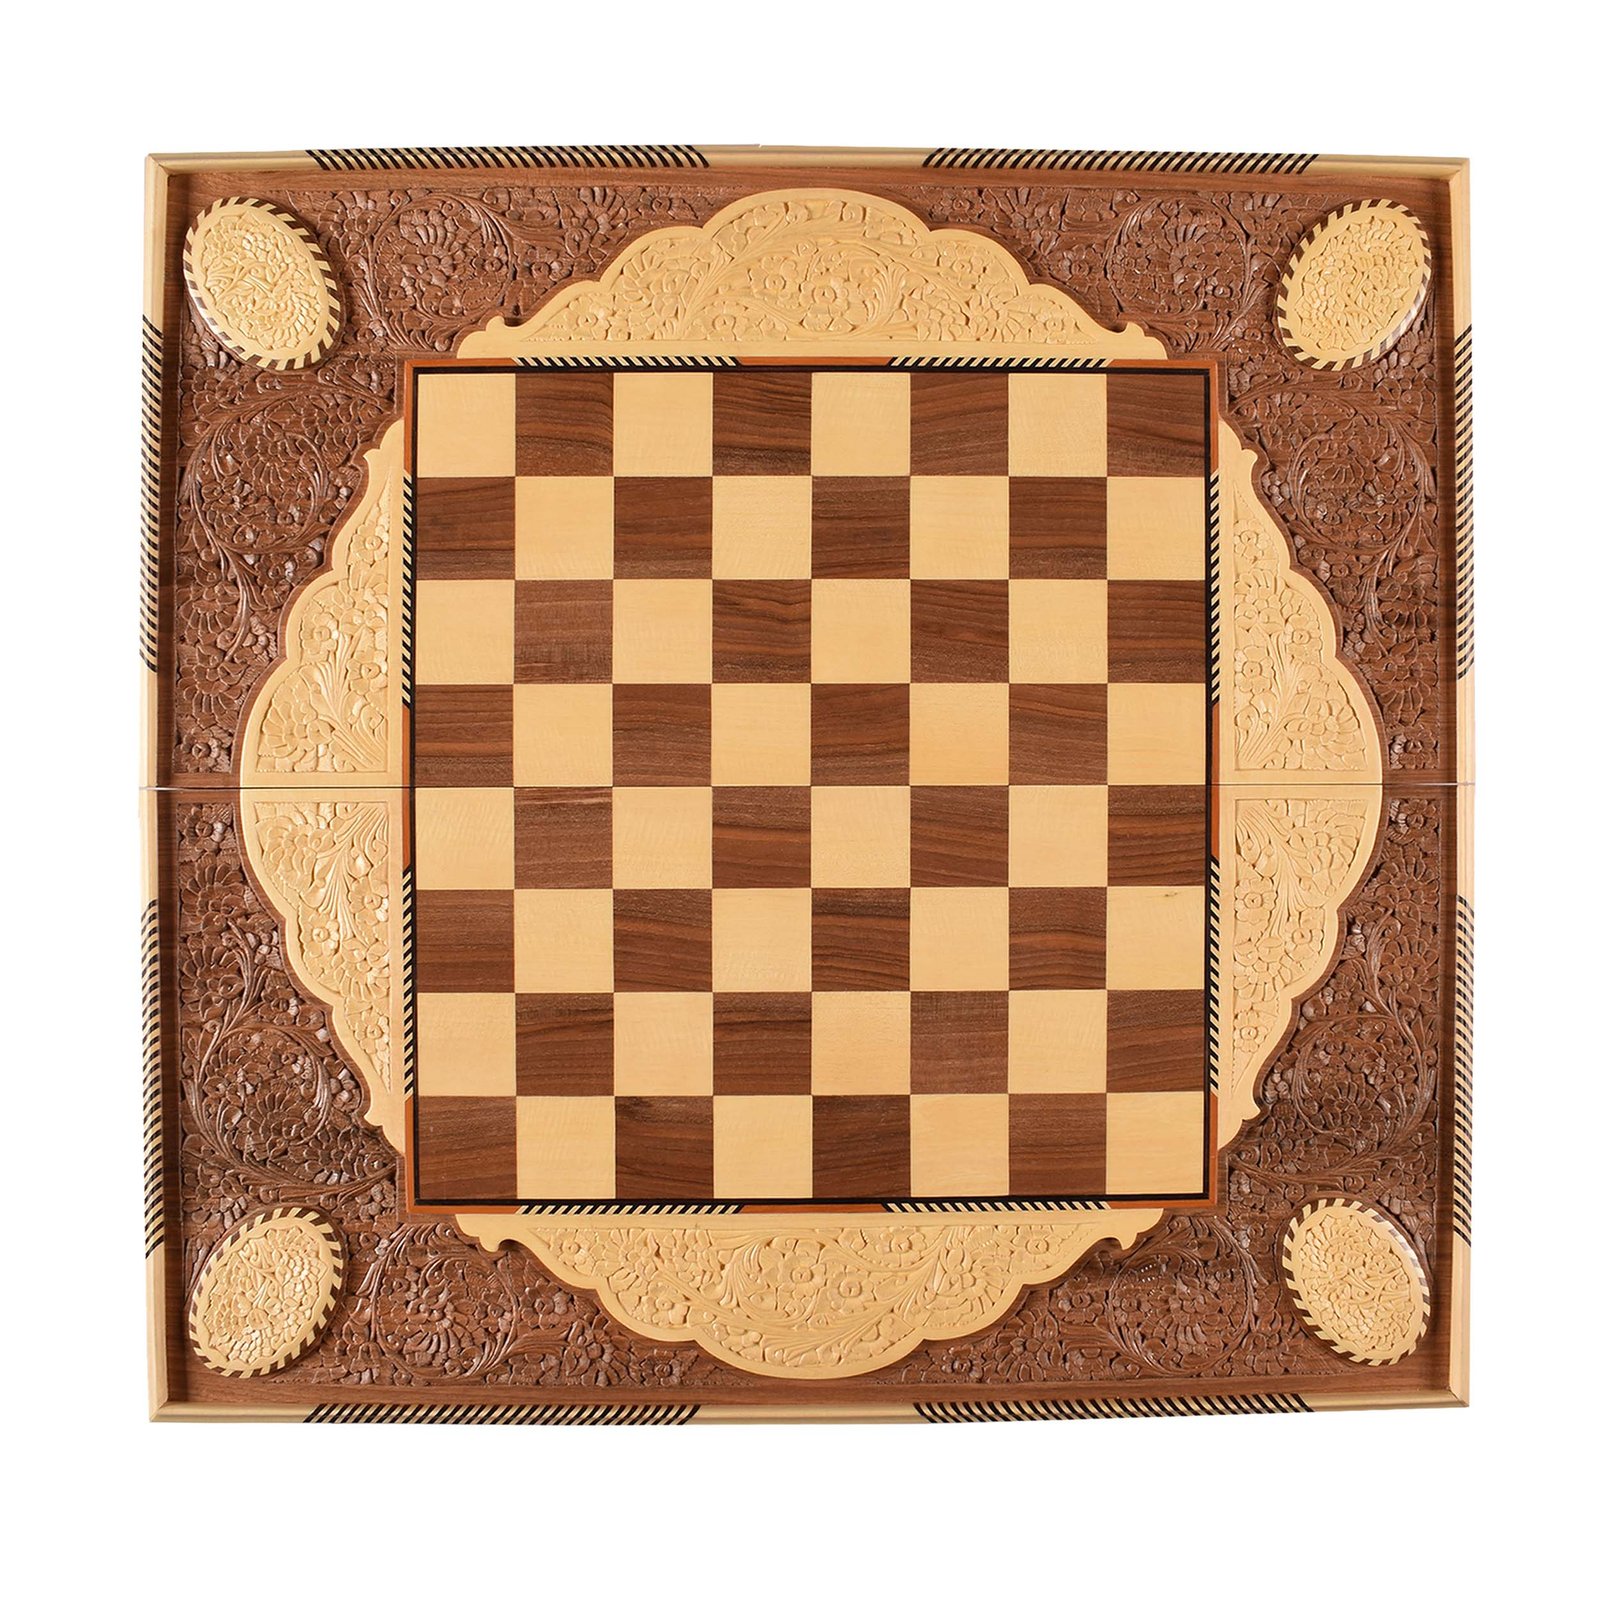 Handmade Wood Carving chess board model TTo50 | The Shop